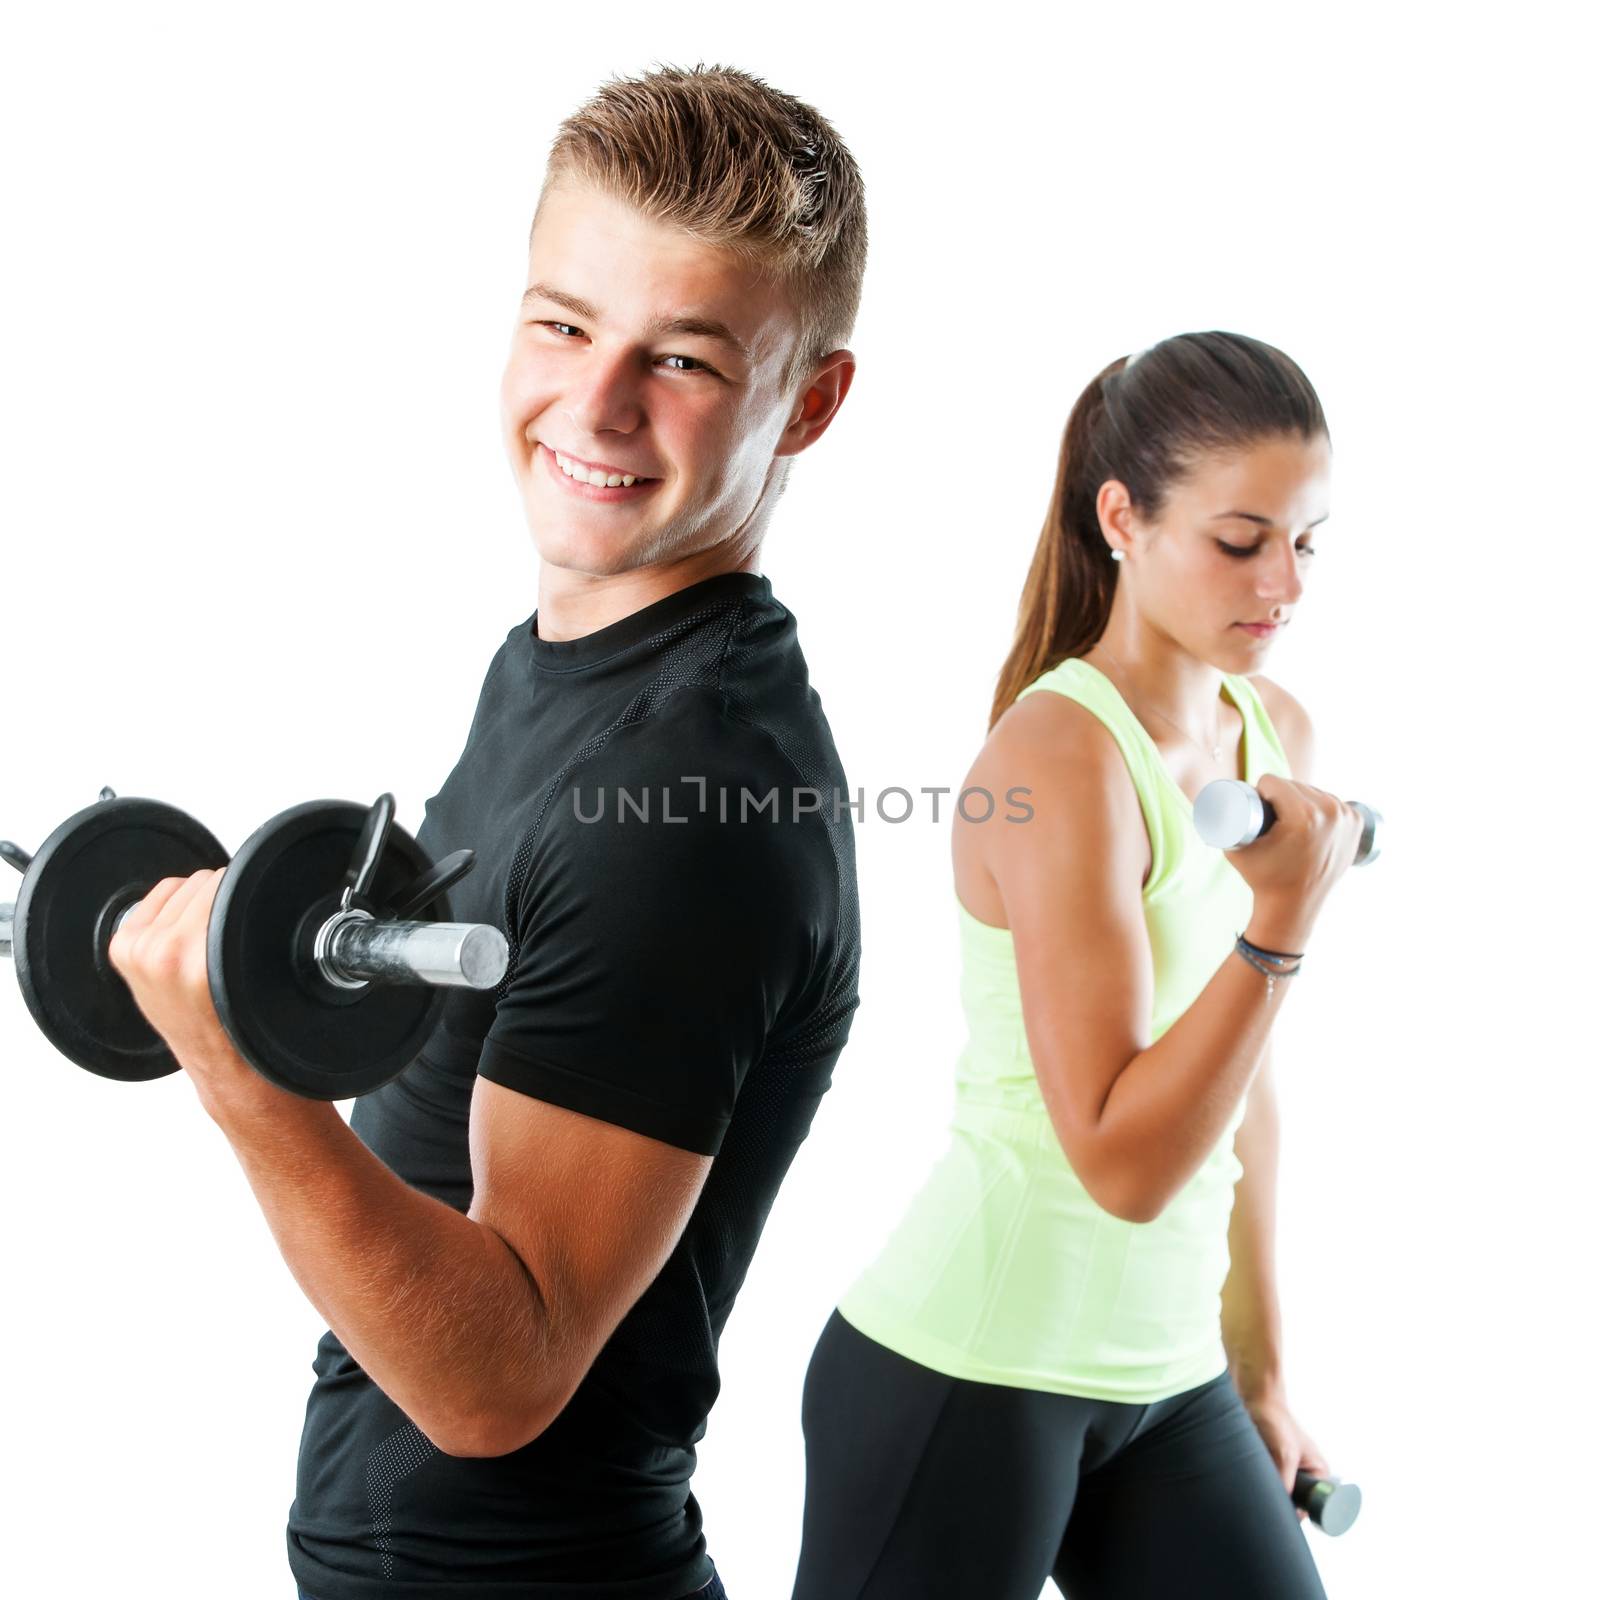 Close up portrait of handsome teen boy working out with weights.Out of focus girl working out in background.Isolated on white.